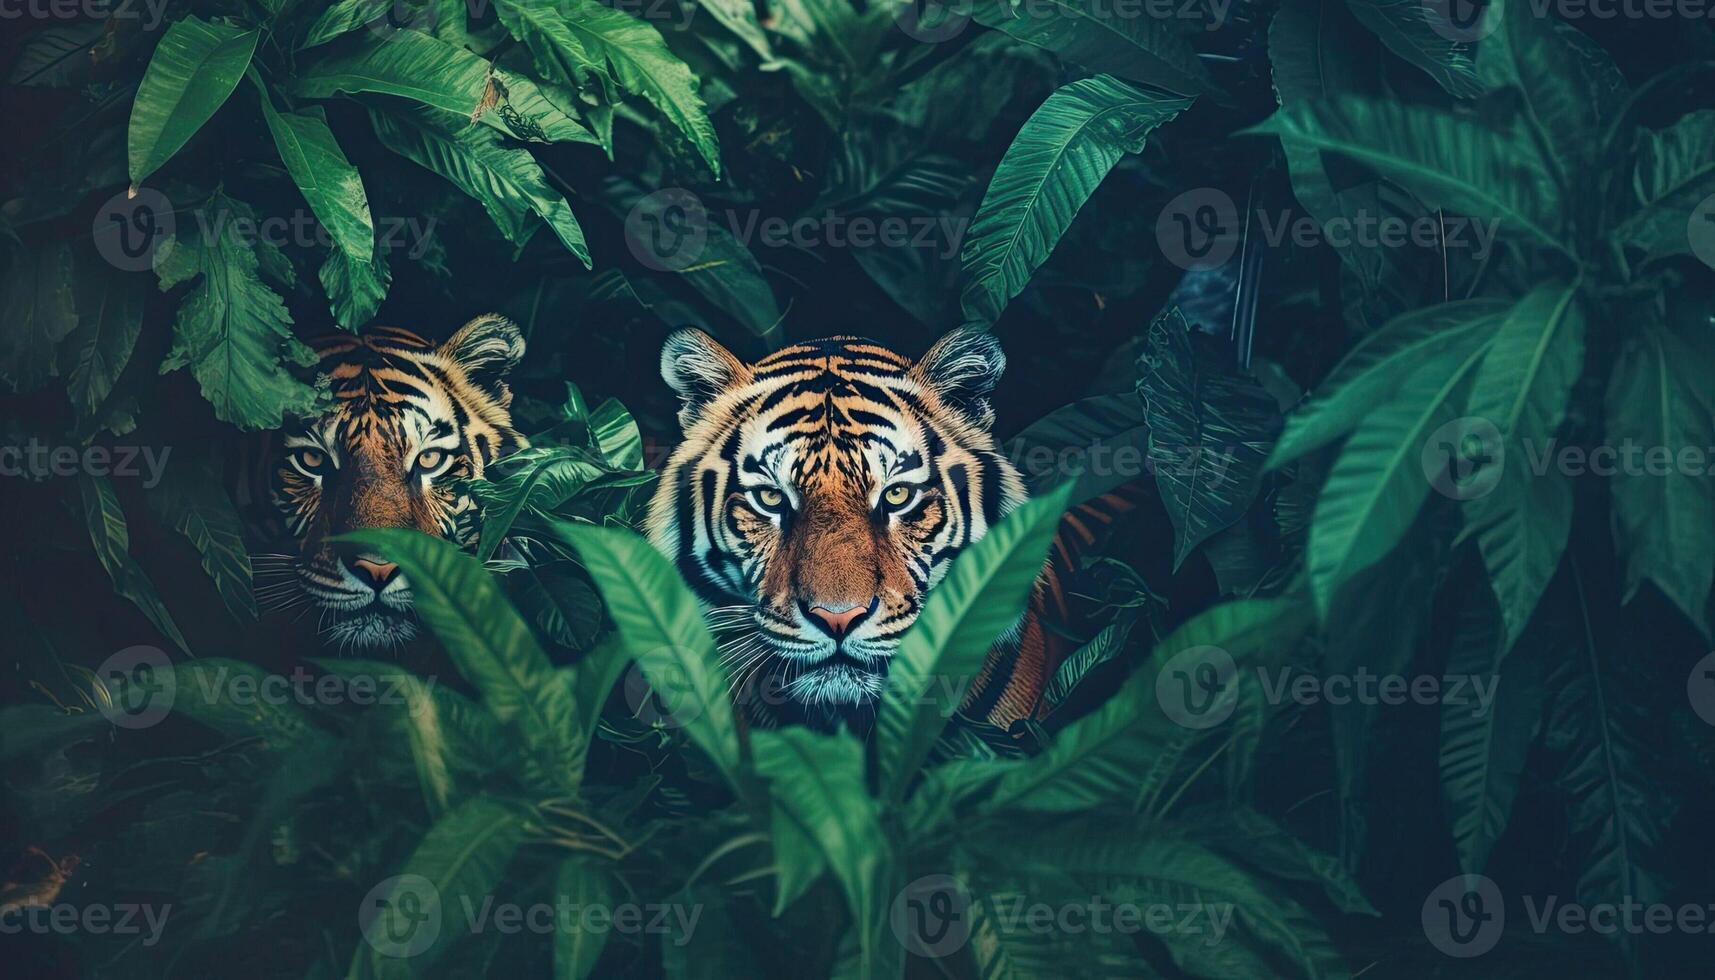 Tigers prowling through a enchanted jungle their fur imbued with shimmering otherworldly patterns photo